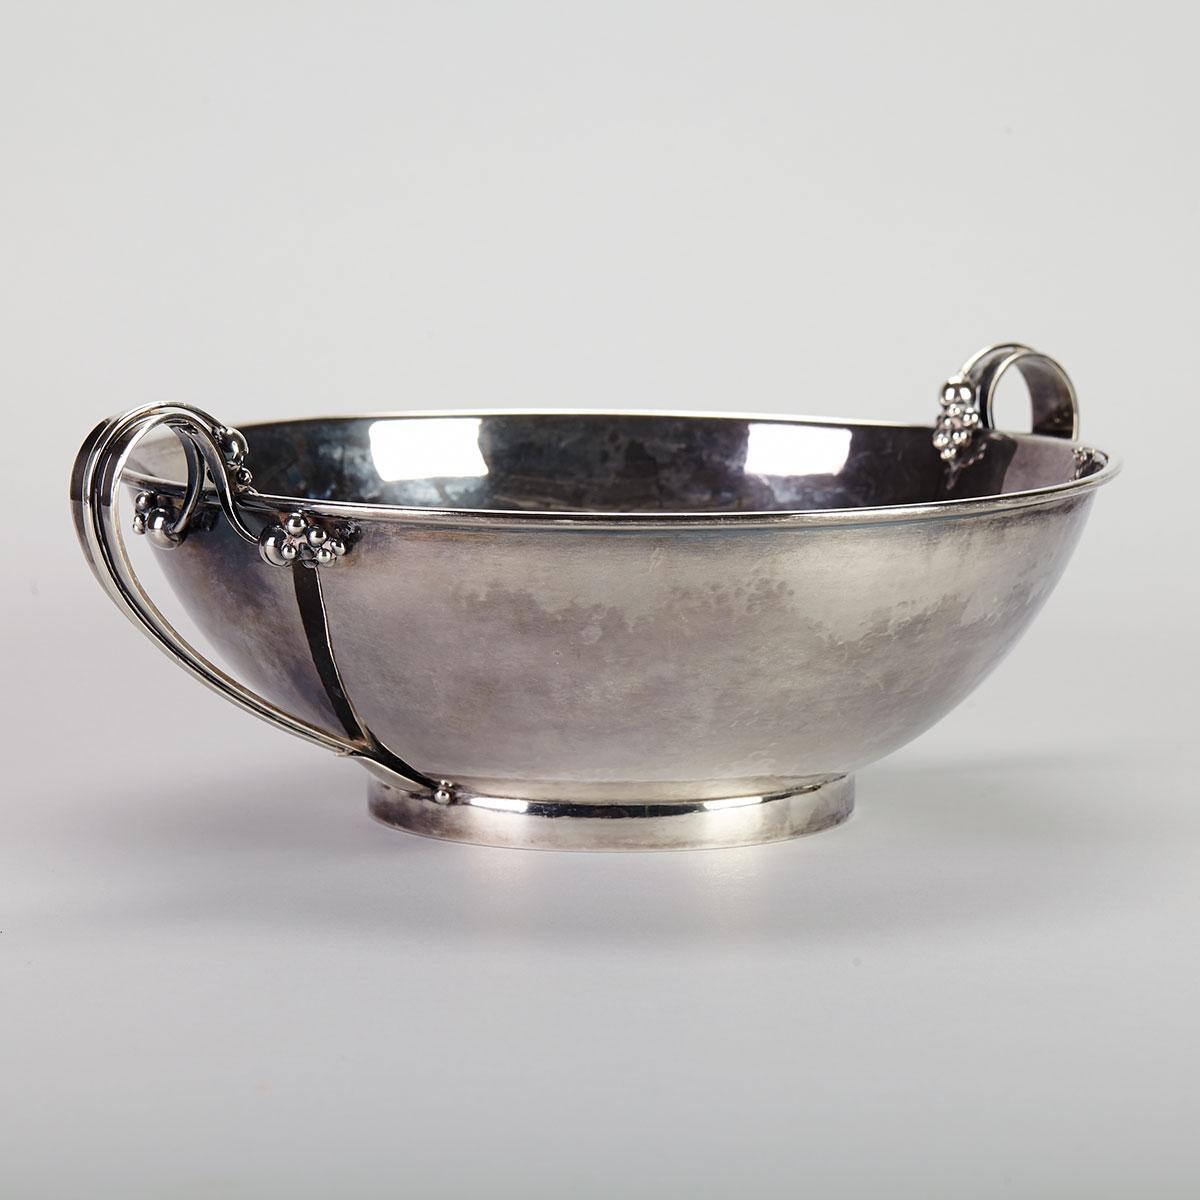 Canadian Silver Two-Handled Bowl, Carl Poul Petersen, Montreal, Que., mid-20th century